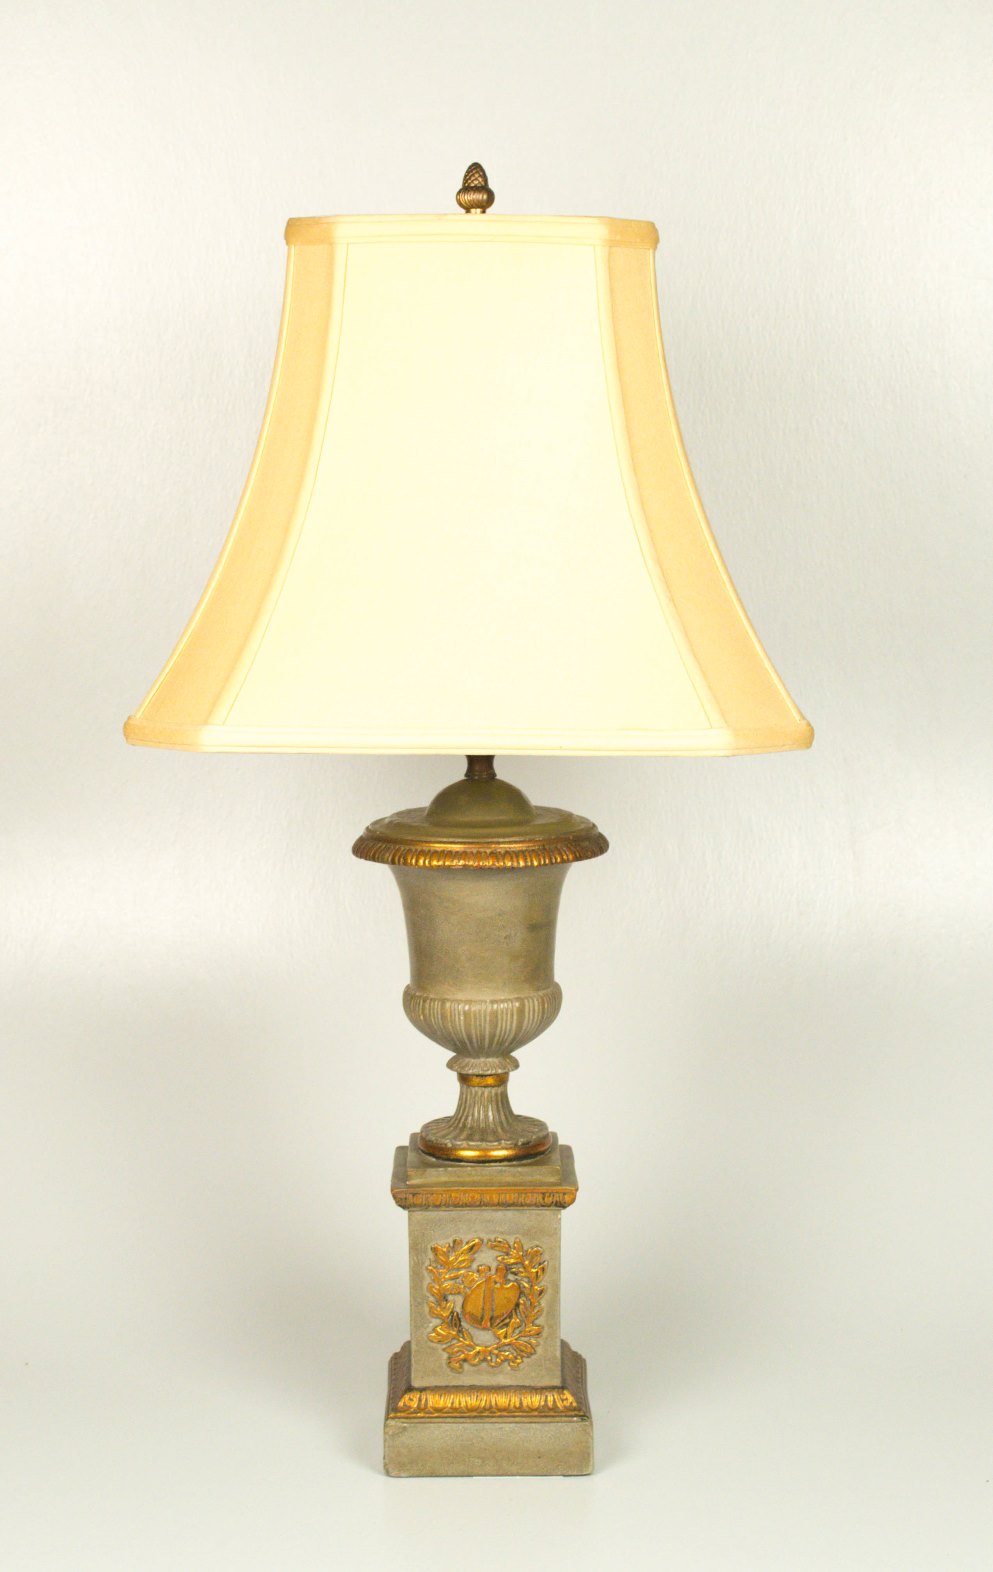 Borghese Neoclassical Style Lamp